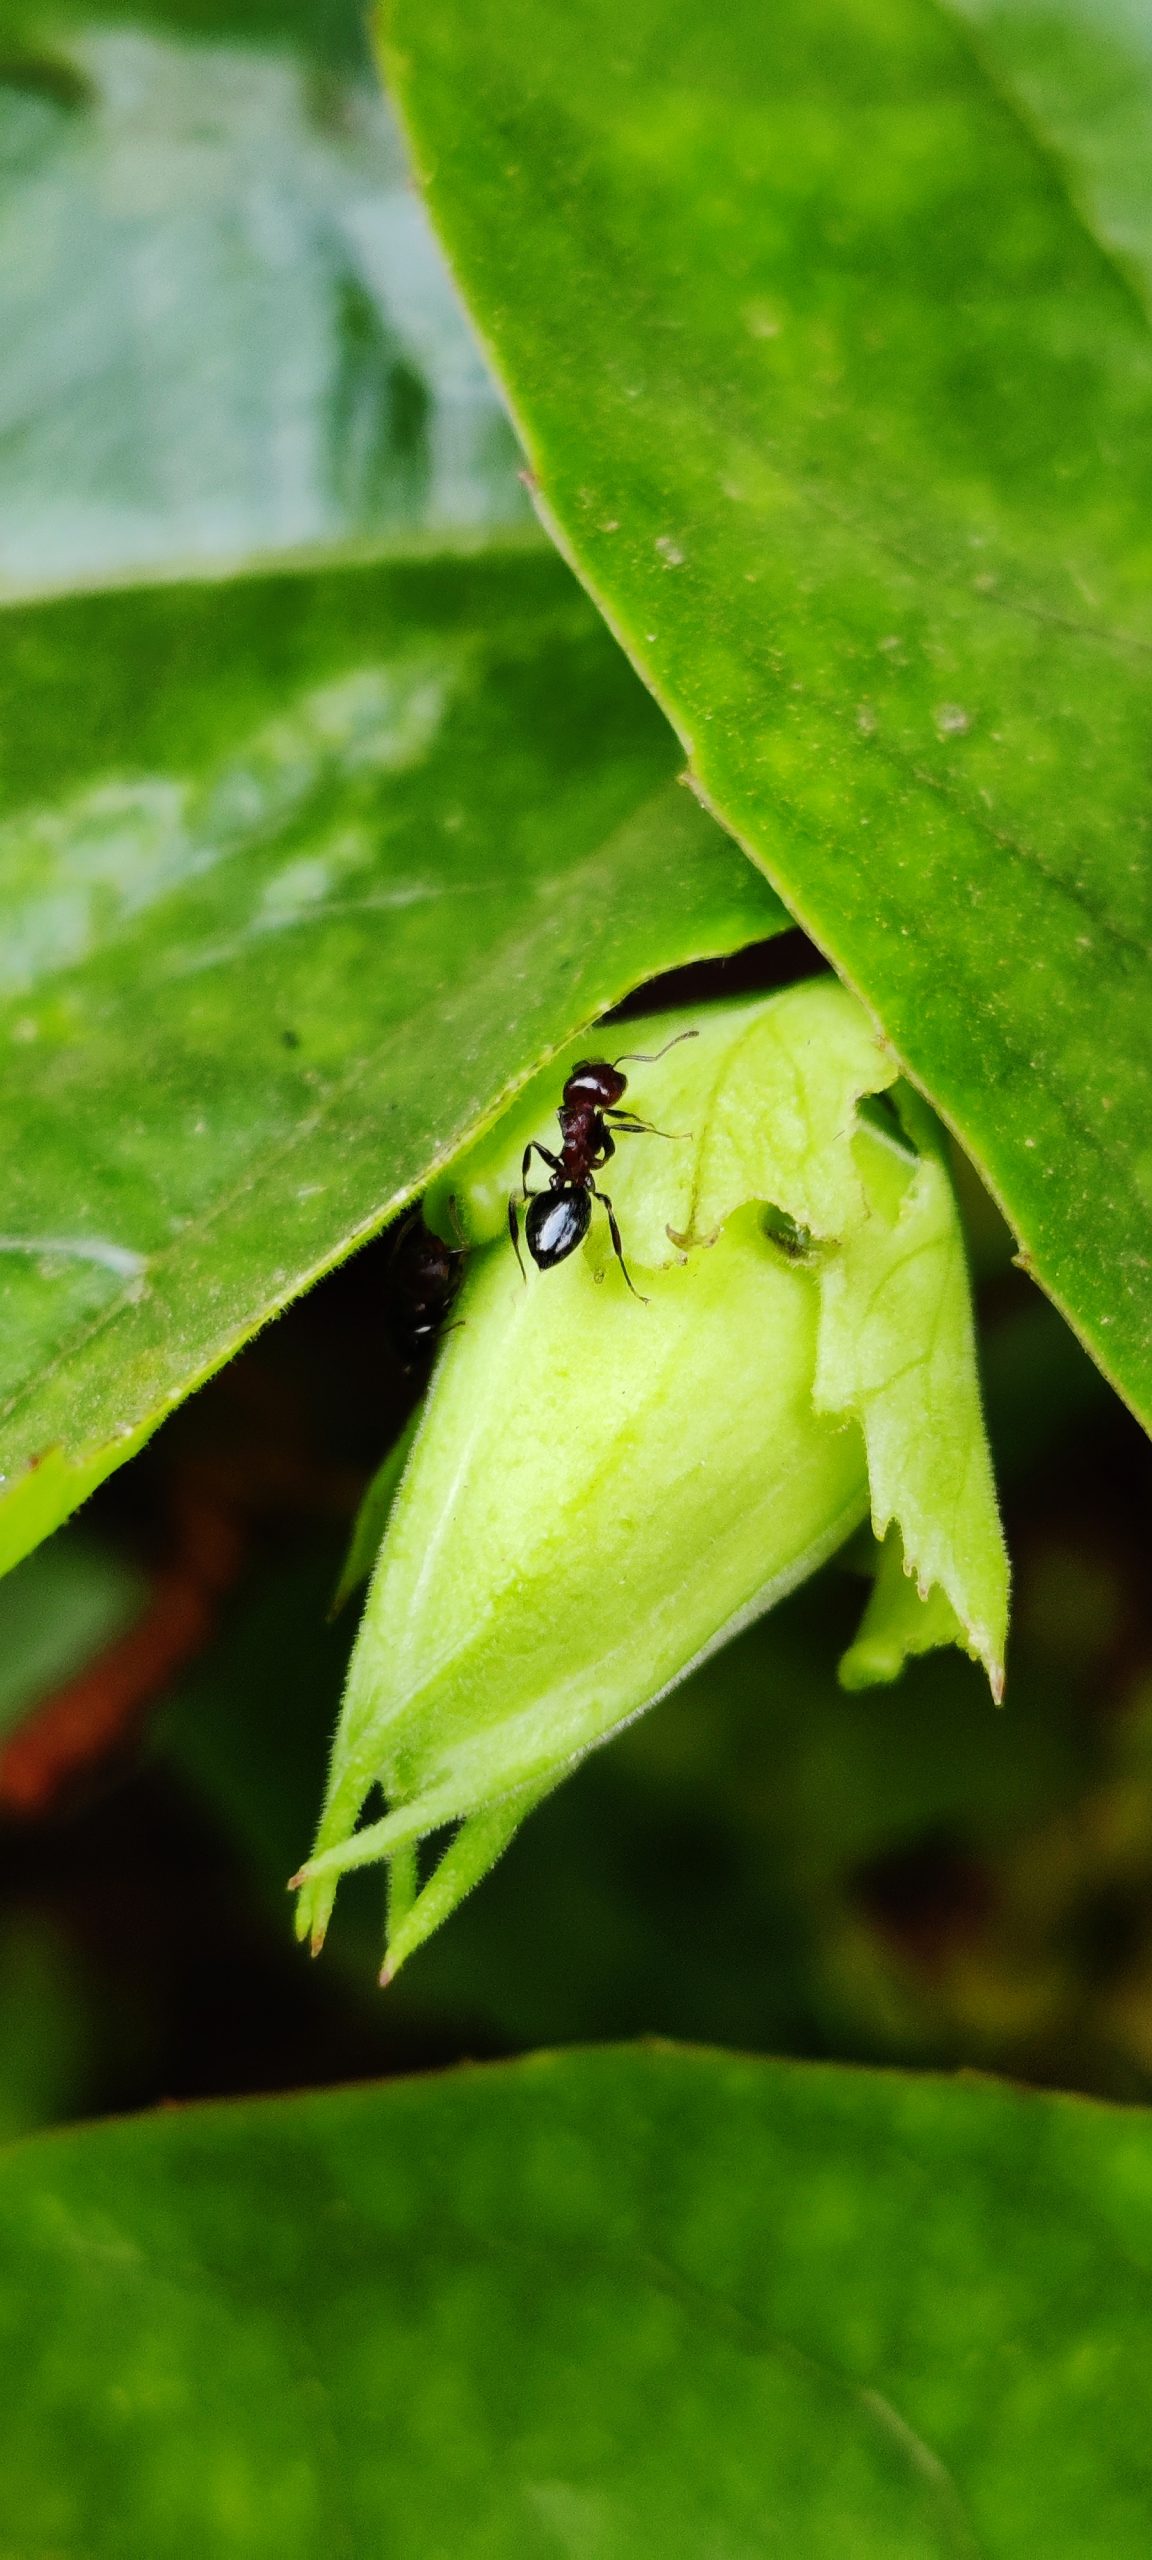 An ant on a flower bud